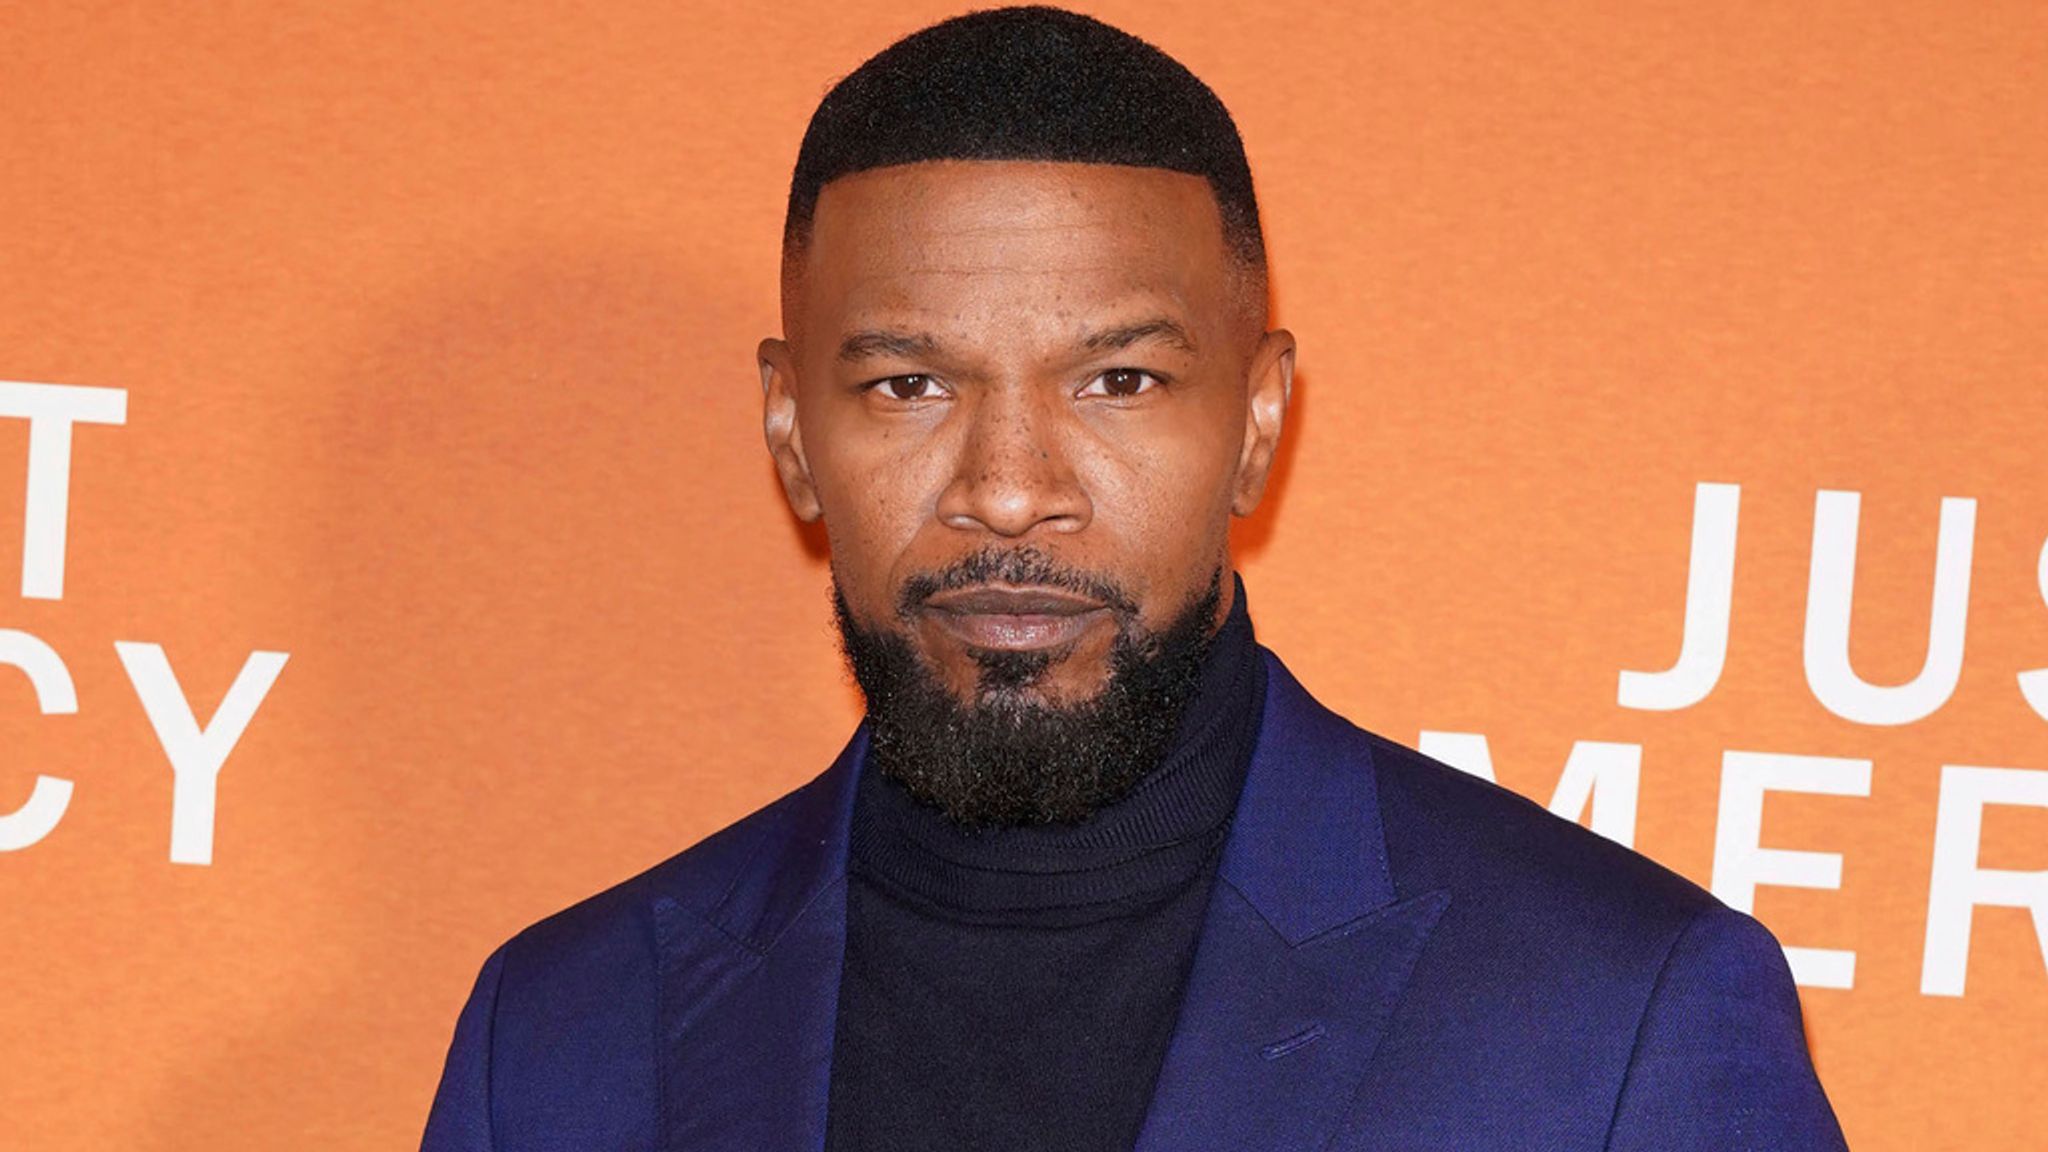 Jamie Foxx updates fans after mystery health scare - and says he's been to 'hell and back' | Ents & Arts News | Sky News